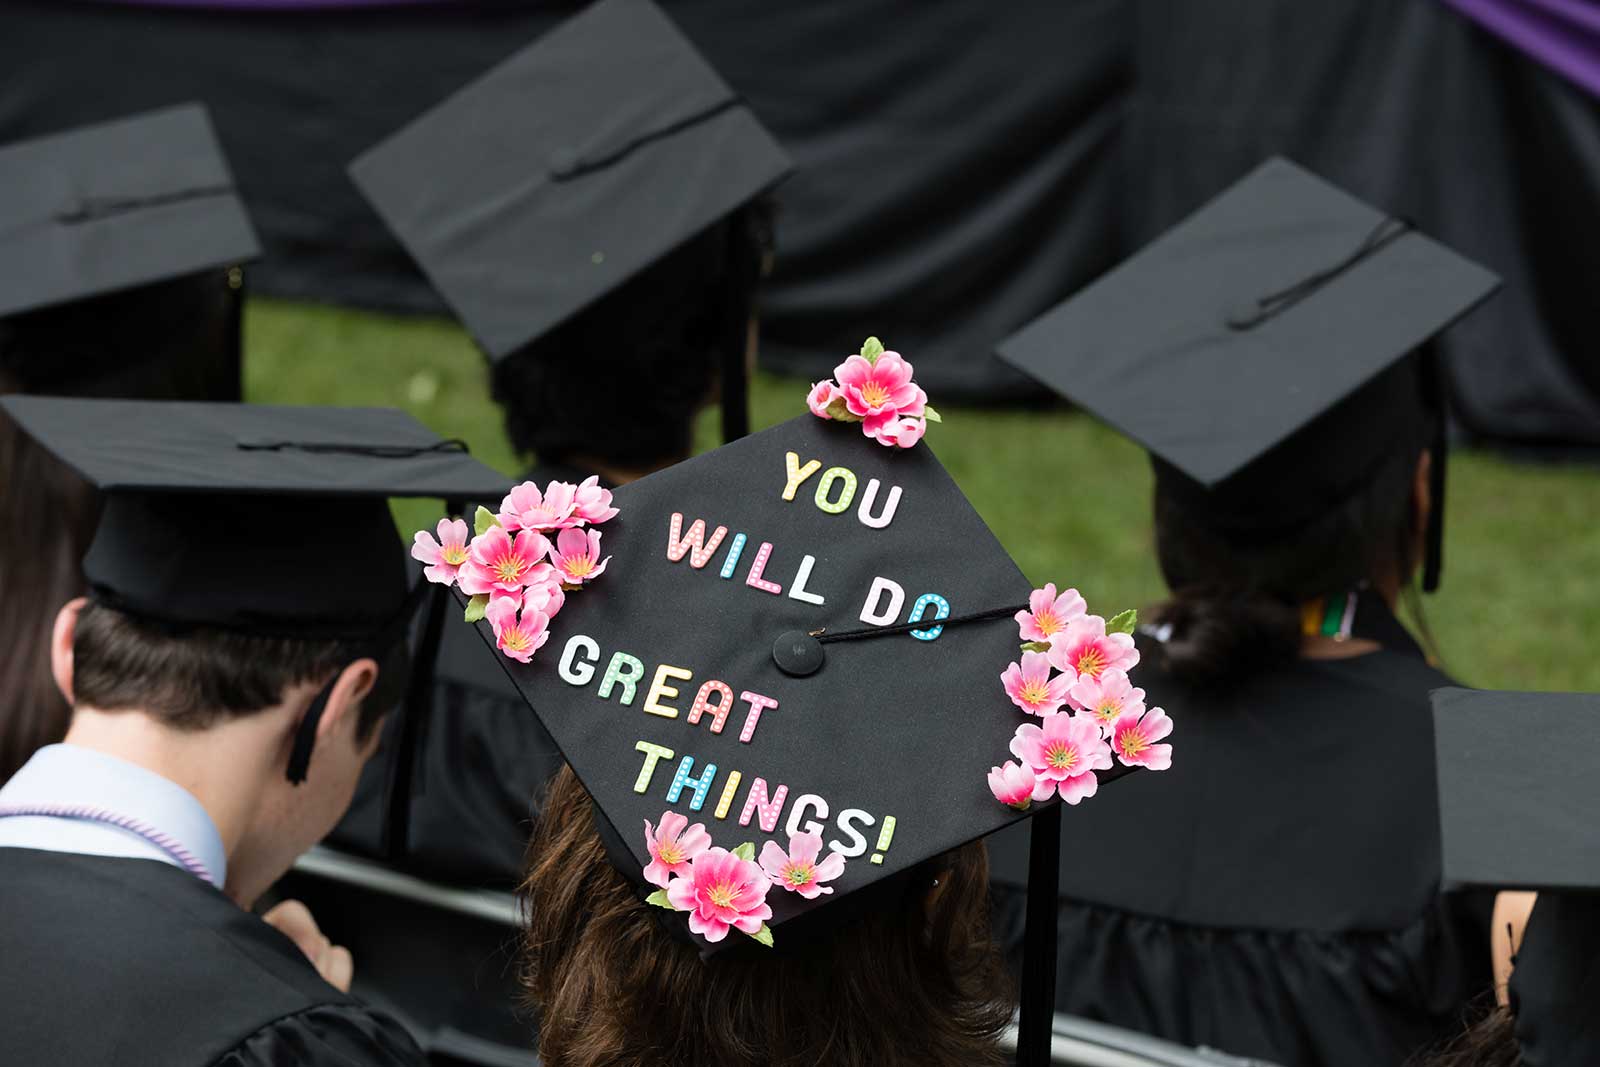 "You will do great things" written on a graduation cap